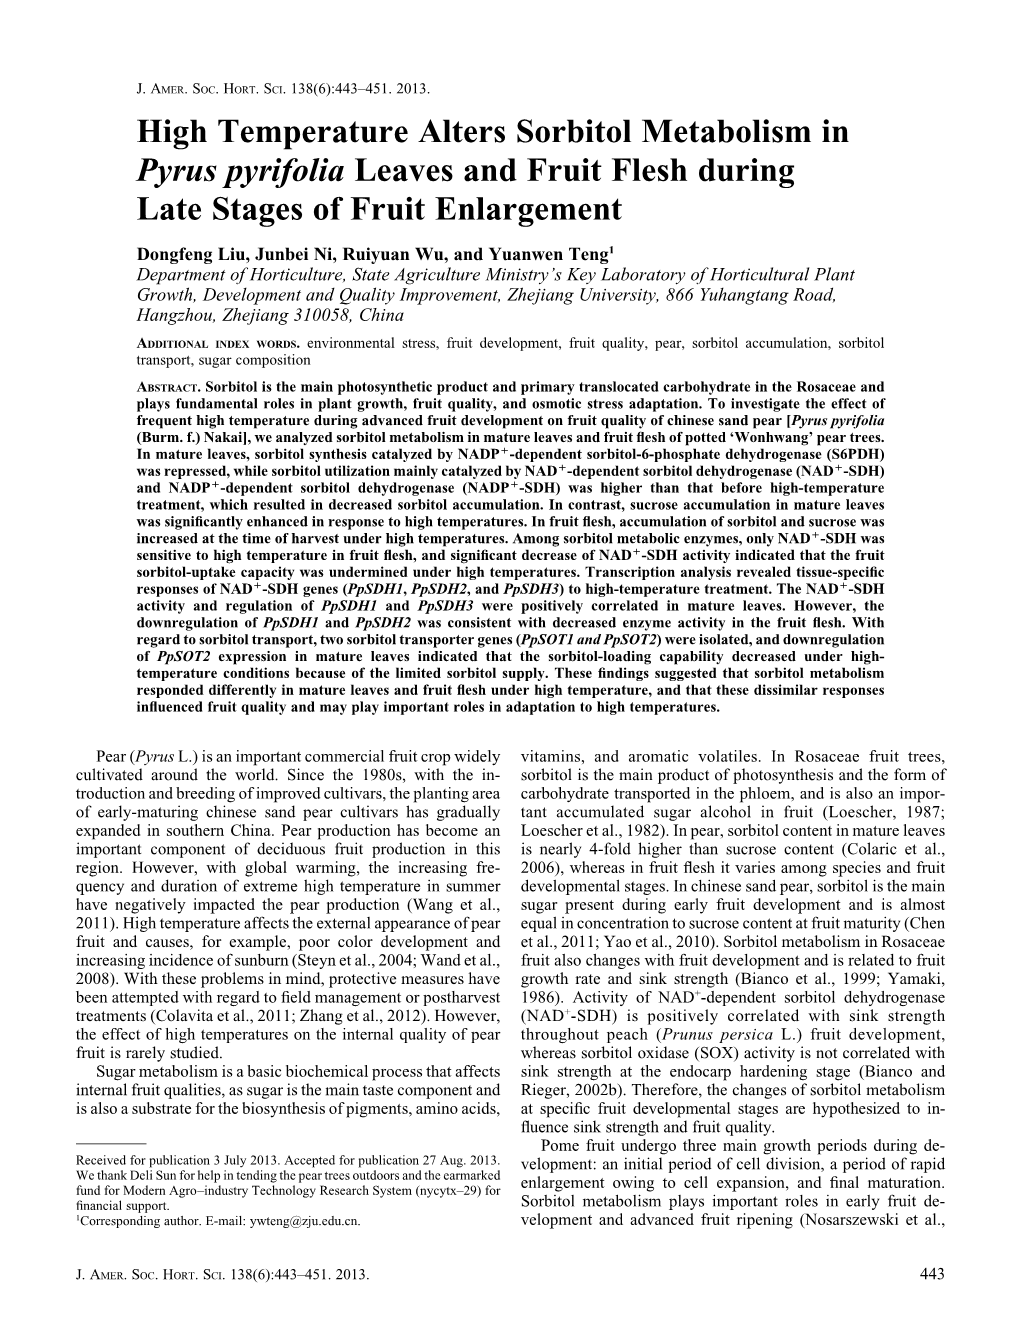 High Temperature Alters Sorbitol Metabolism in Pyrus Pyrifolia Leaves and Fruit Flesh During Late Stages of Fruit Enlargement